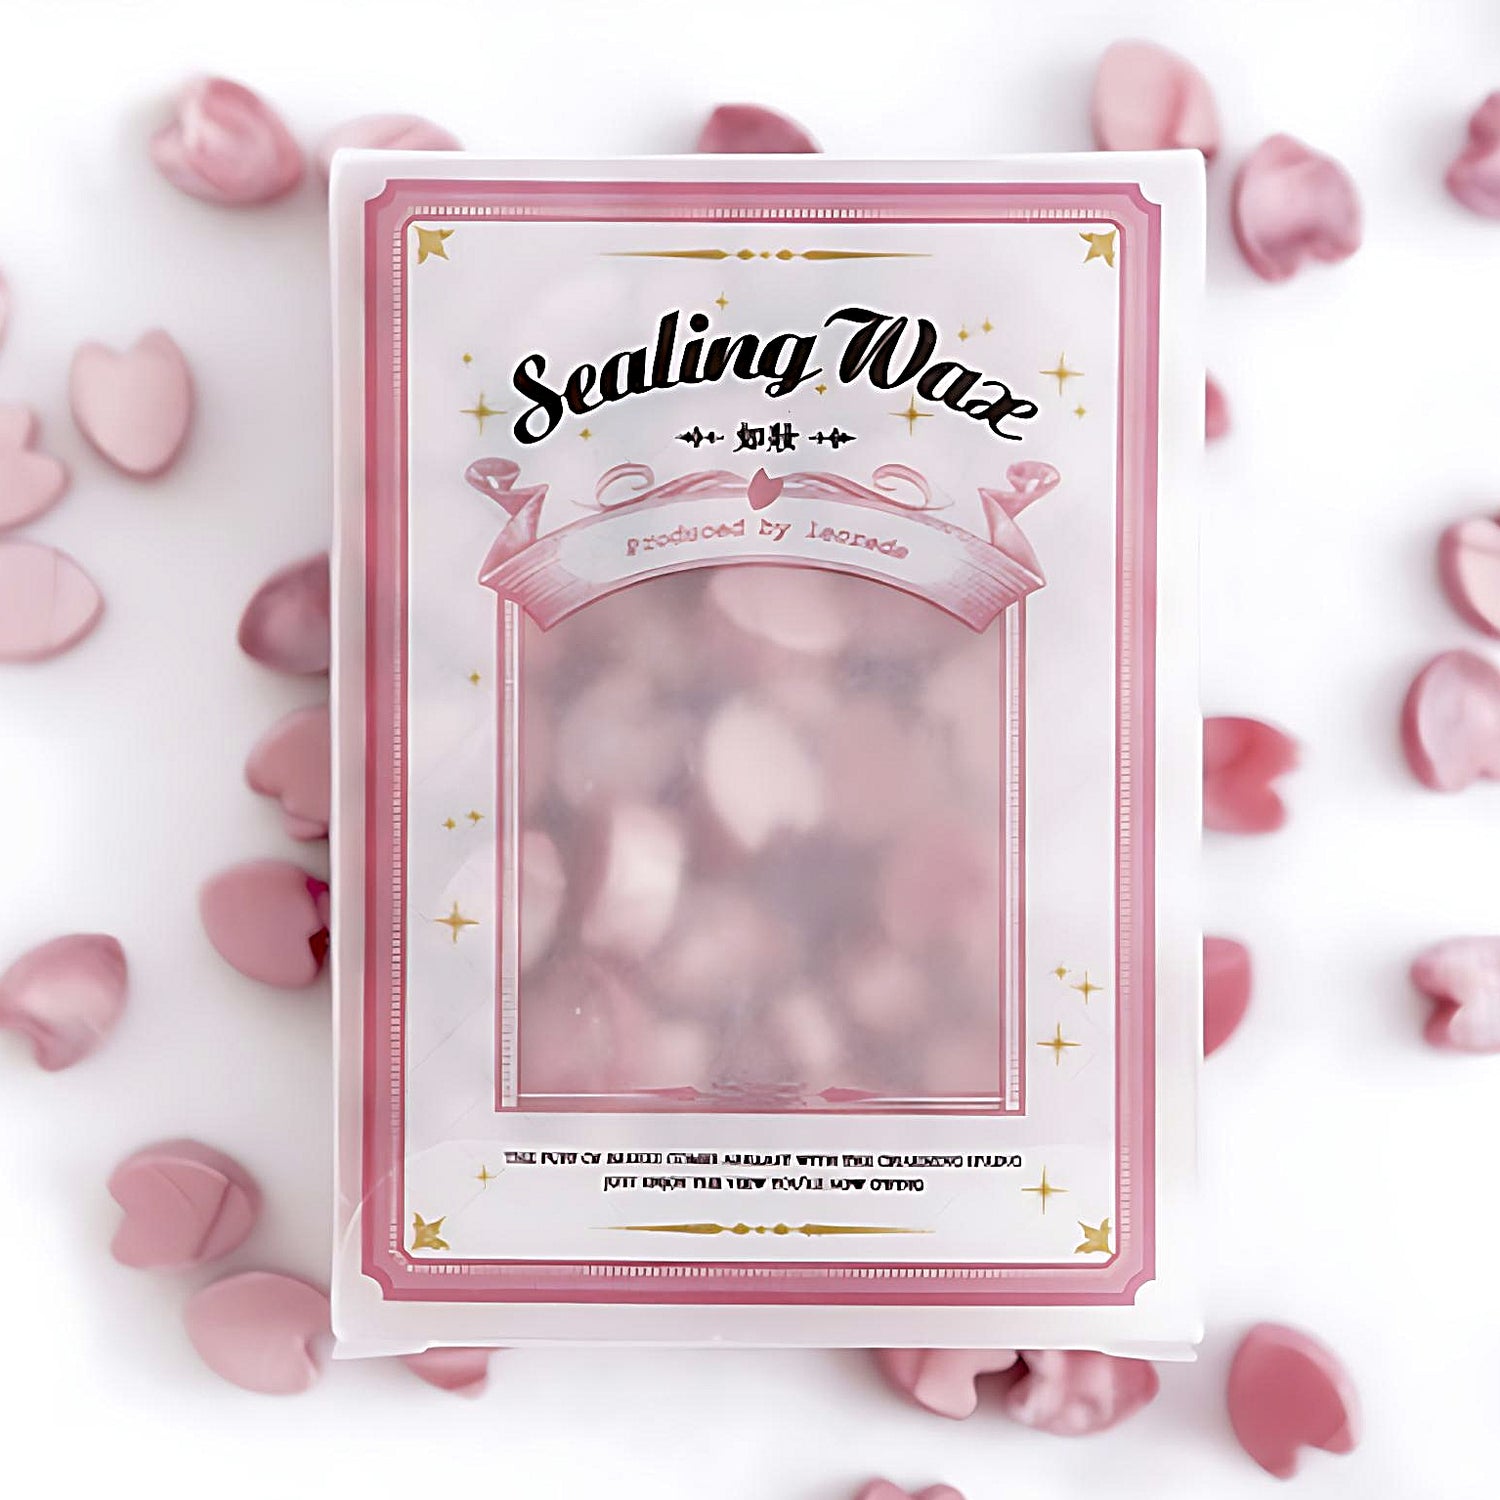 a pack of heart-shaped sealing wax in vintage pink color